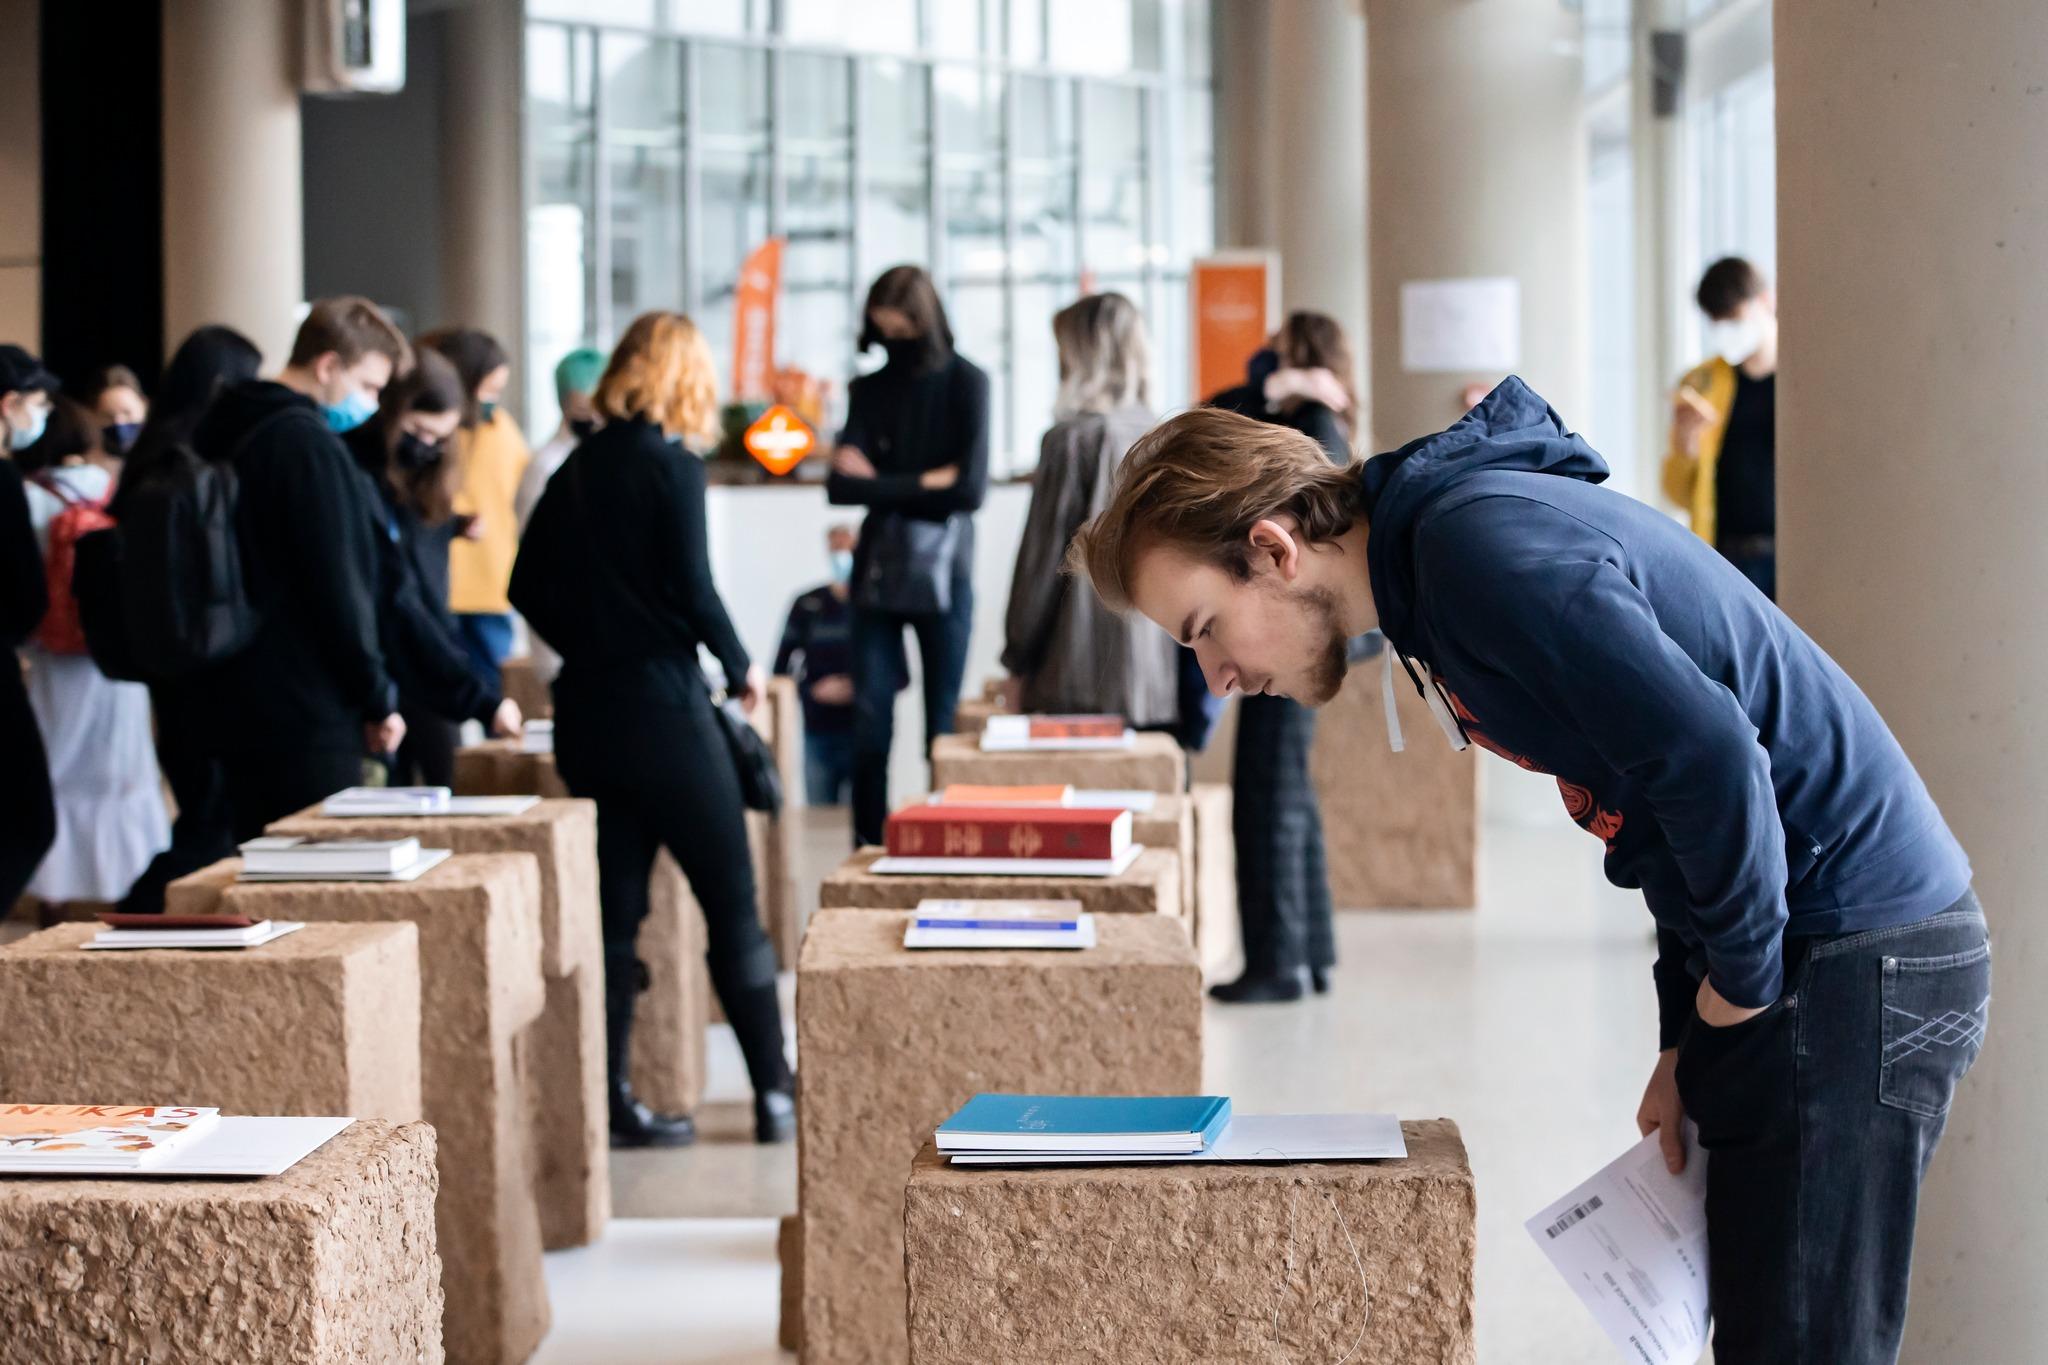 Book Arsenal presents its special programme of events at the Vilnius Book Fair, co-curated by the Lithuanian Culture Institute